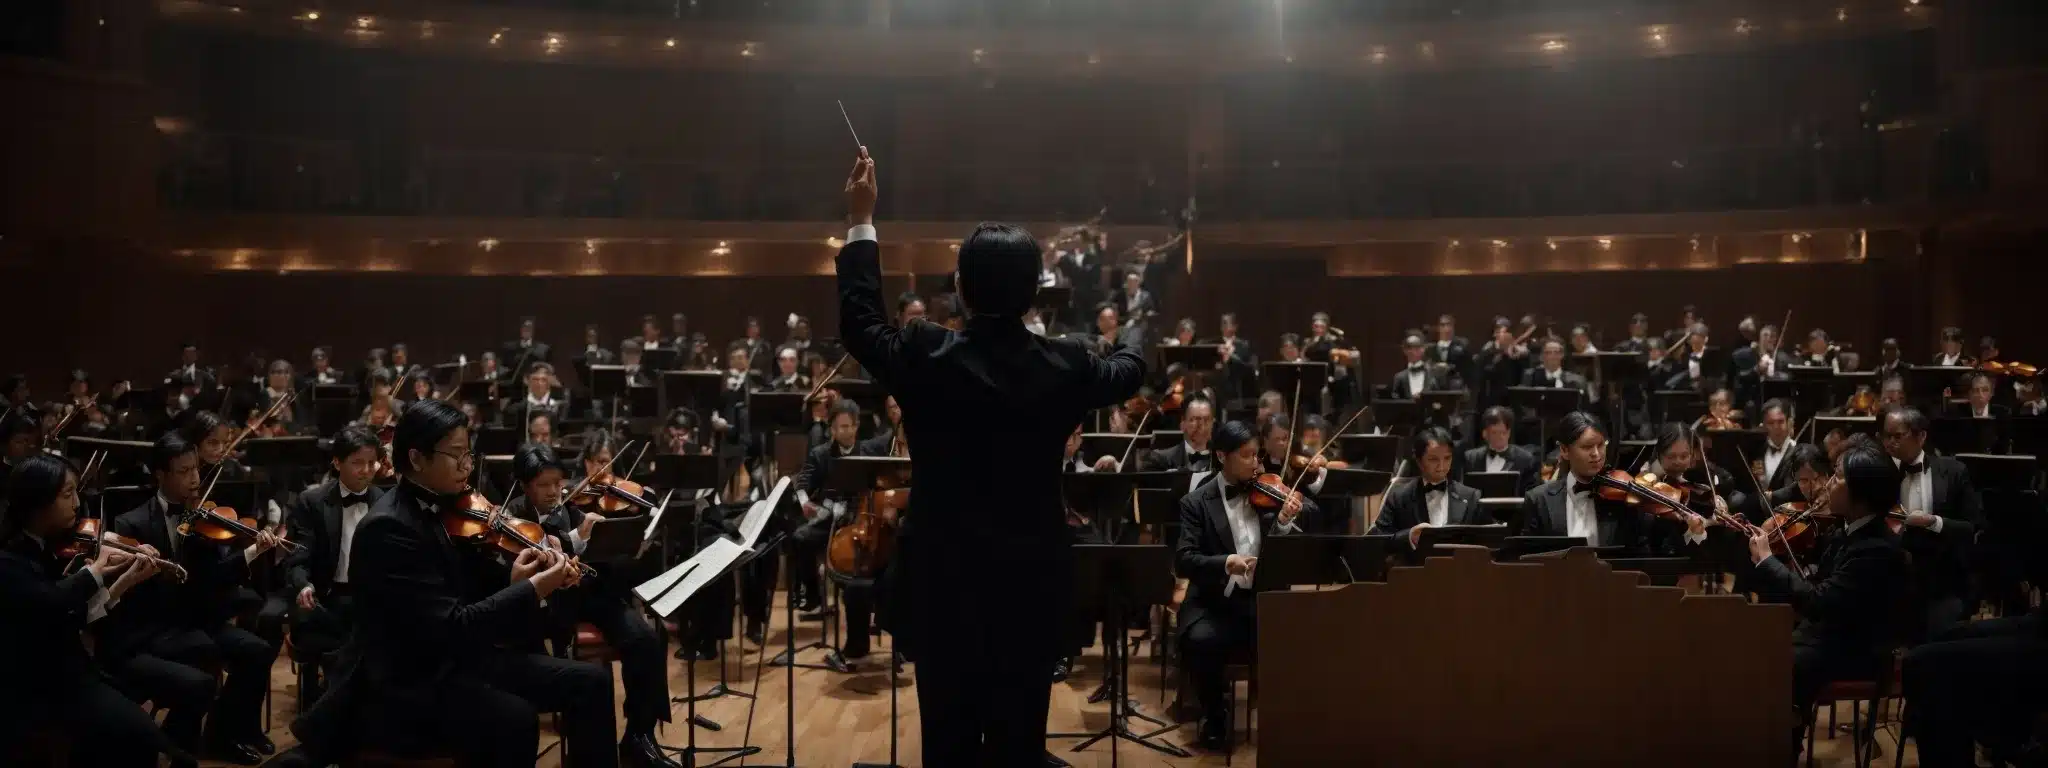 A Conductor With Their Baton Raised Stands Before An Attentive Orchestra, Poised To Harmonize The Ensemble'S Performance.